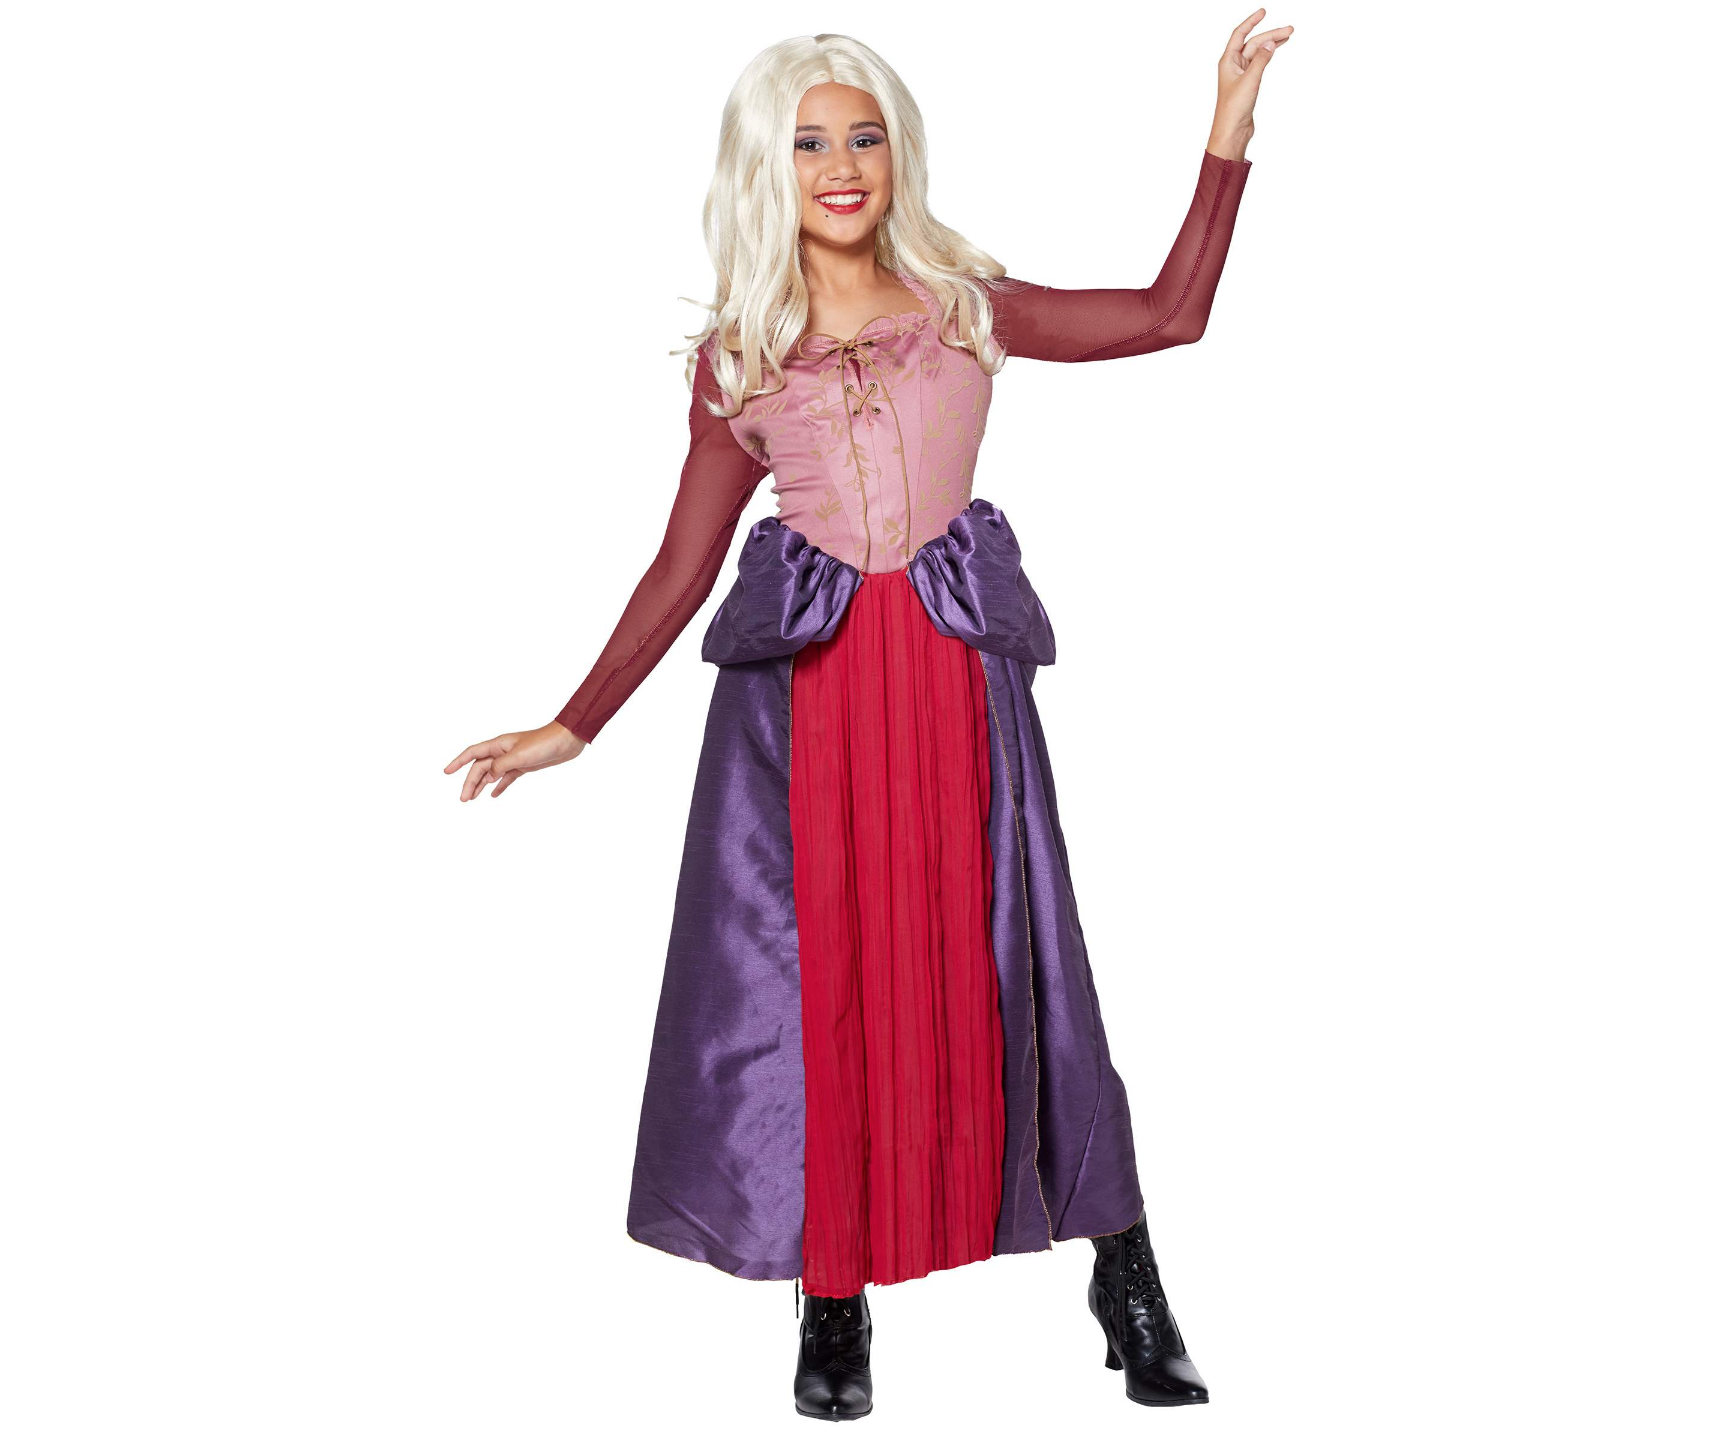 Details about / Hocus Pocus Sarah Sanderson Cosplay Costume Witch Robe Dres...